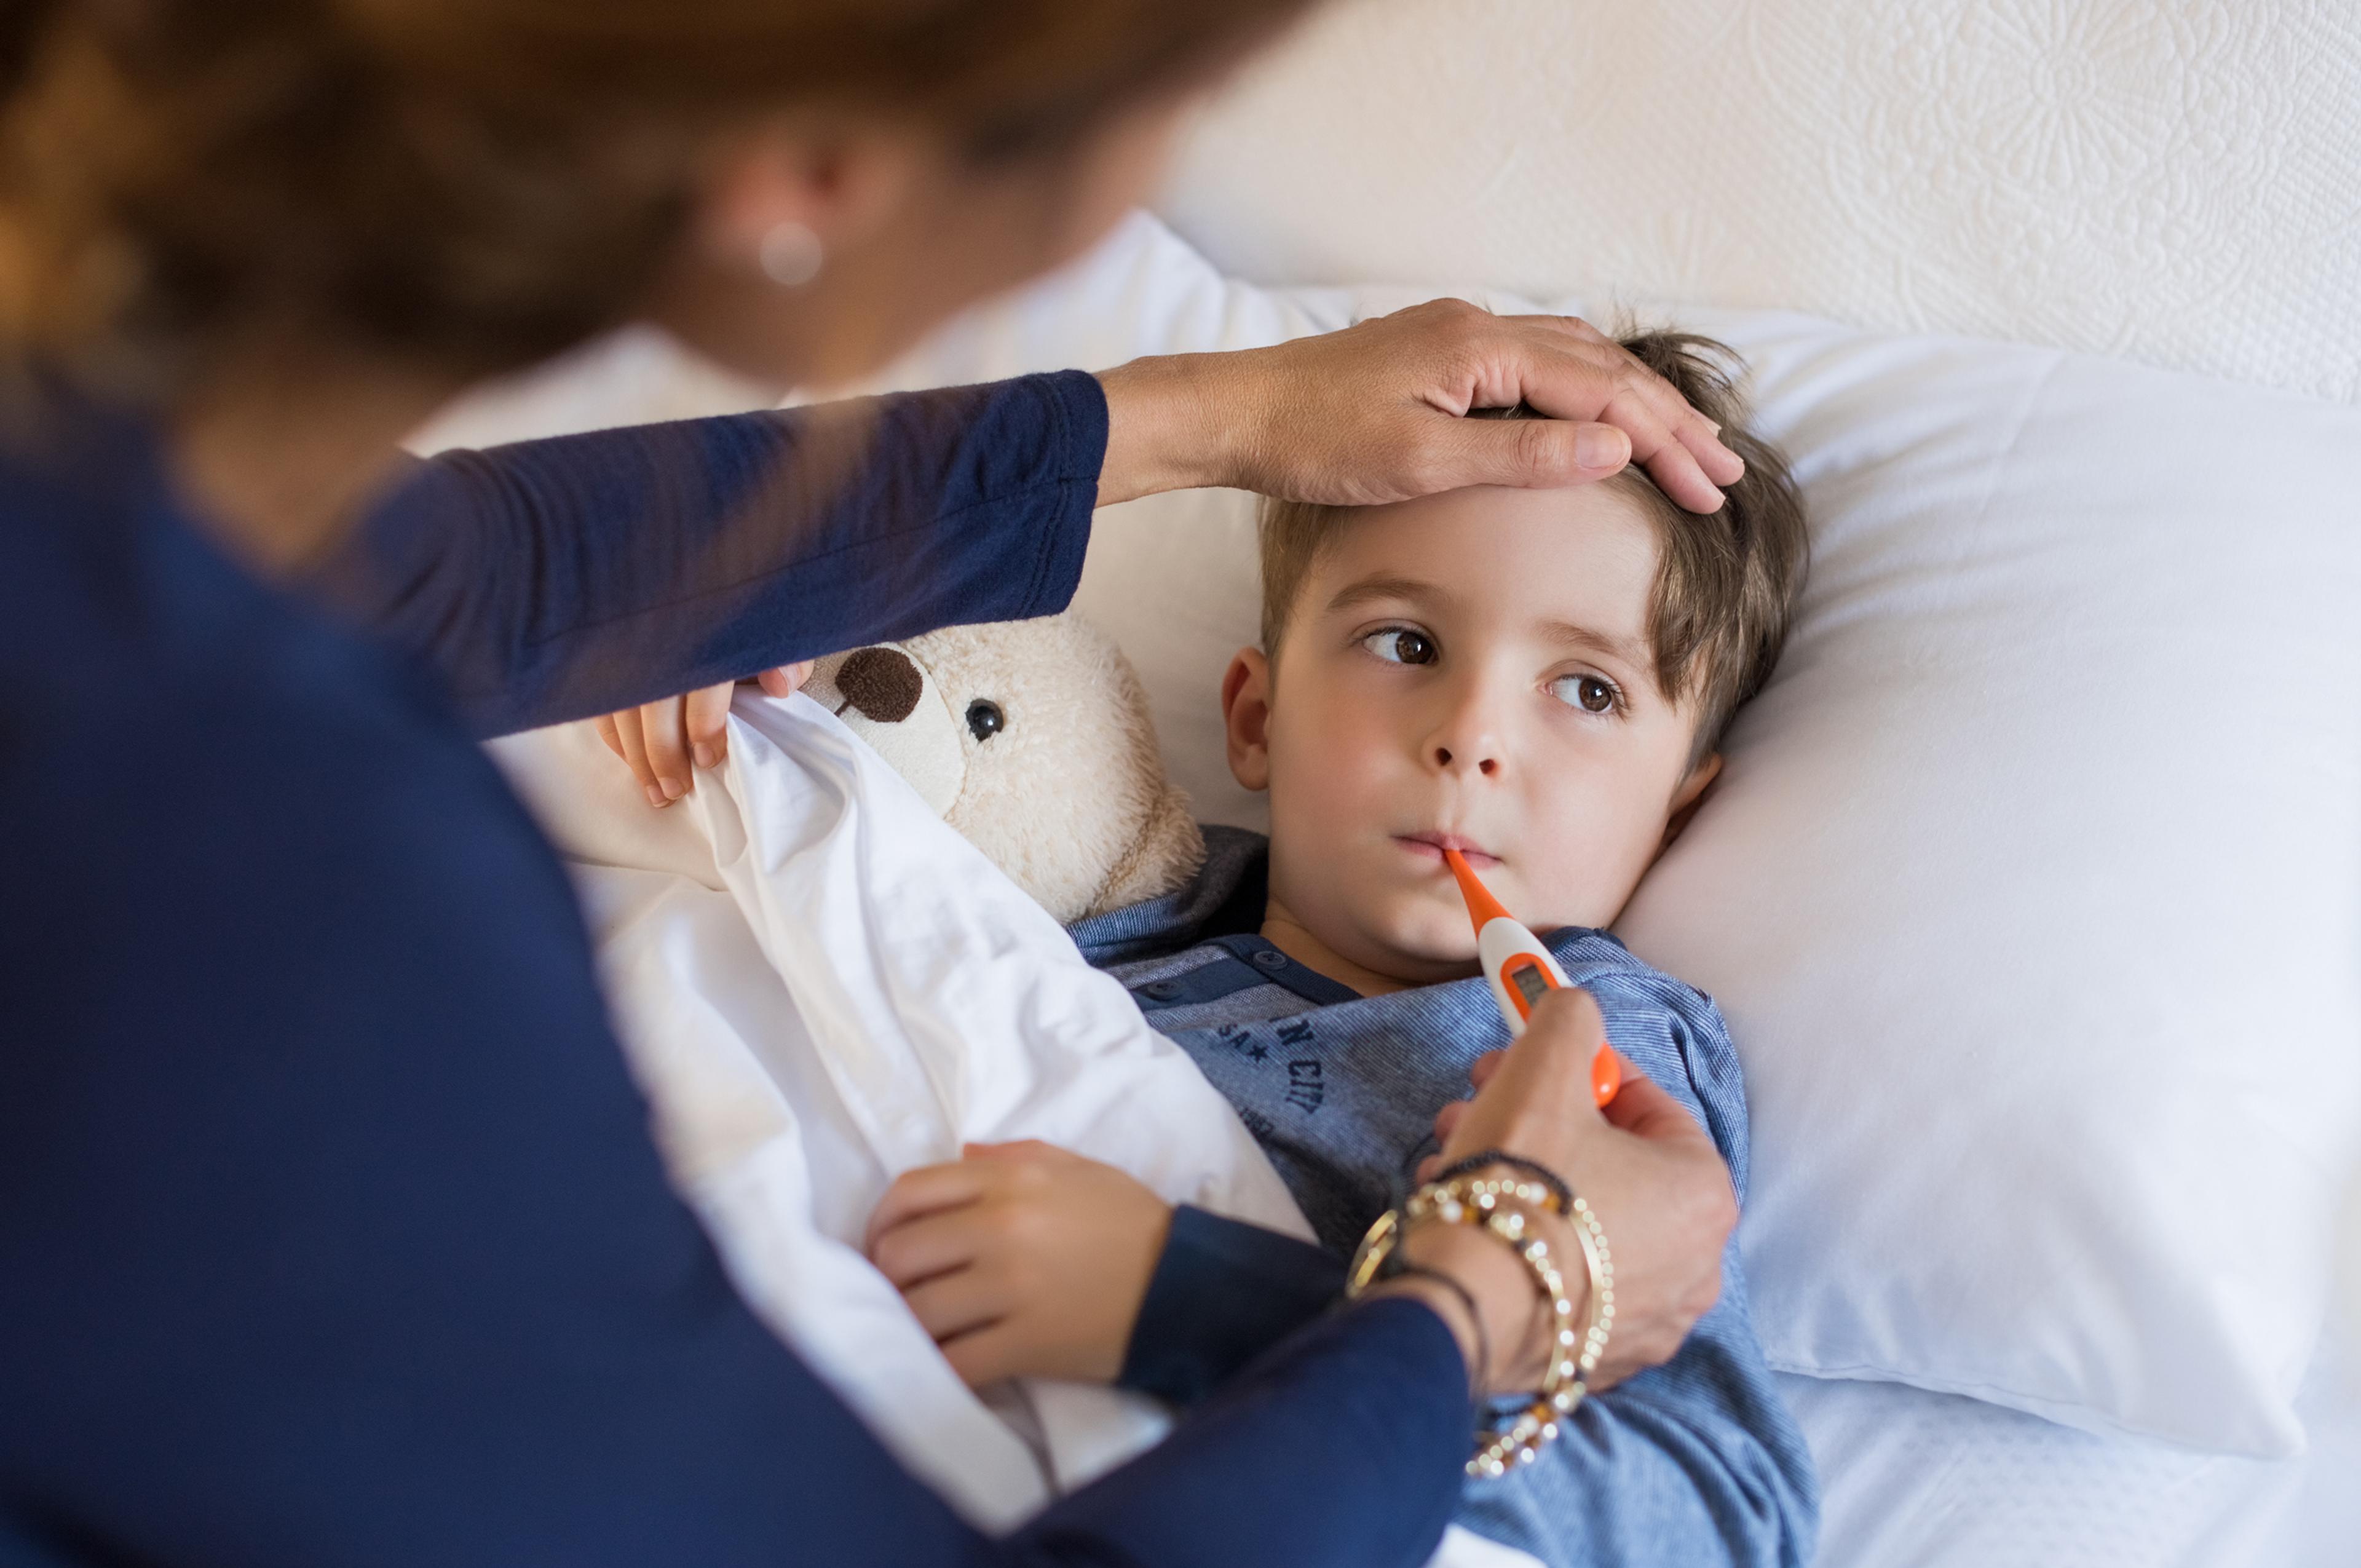 A young boy has his temperature checked in bed.